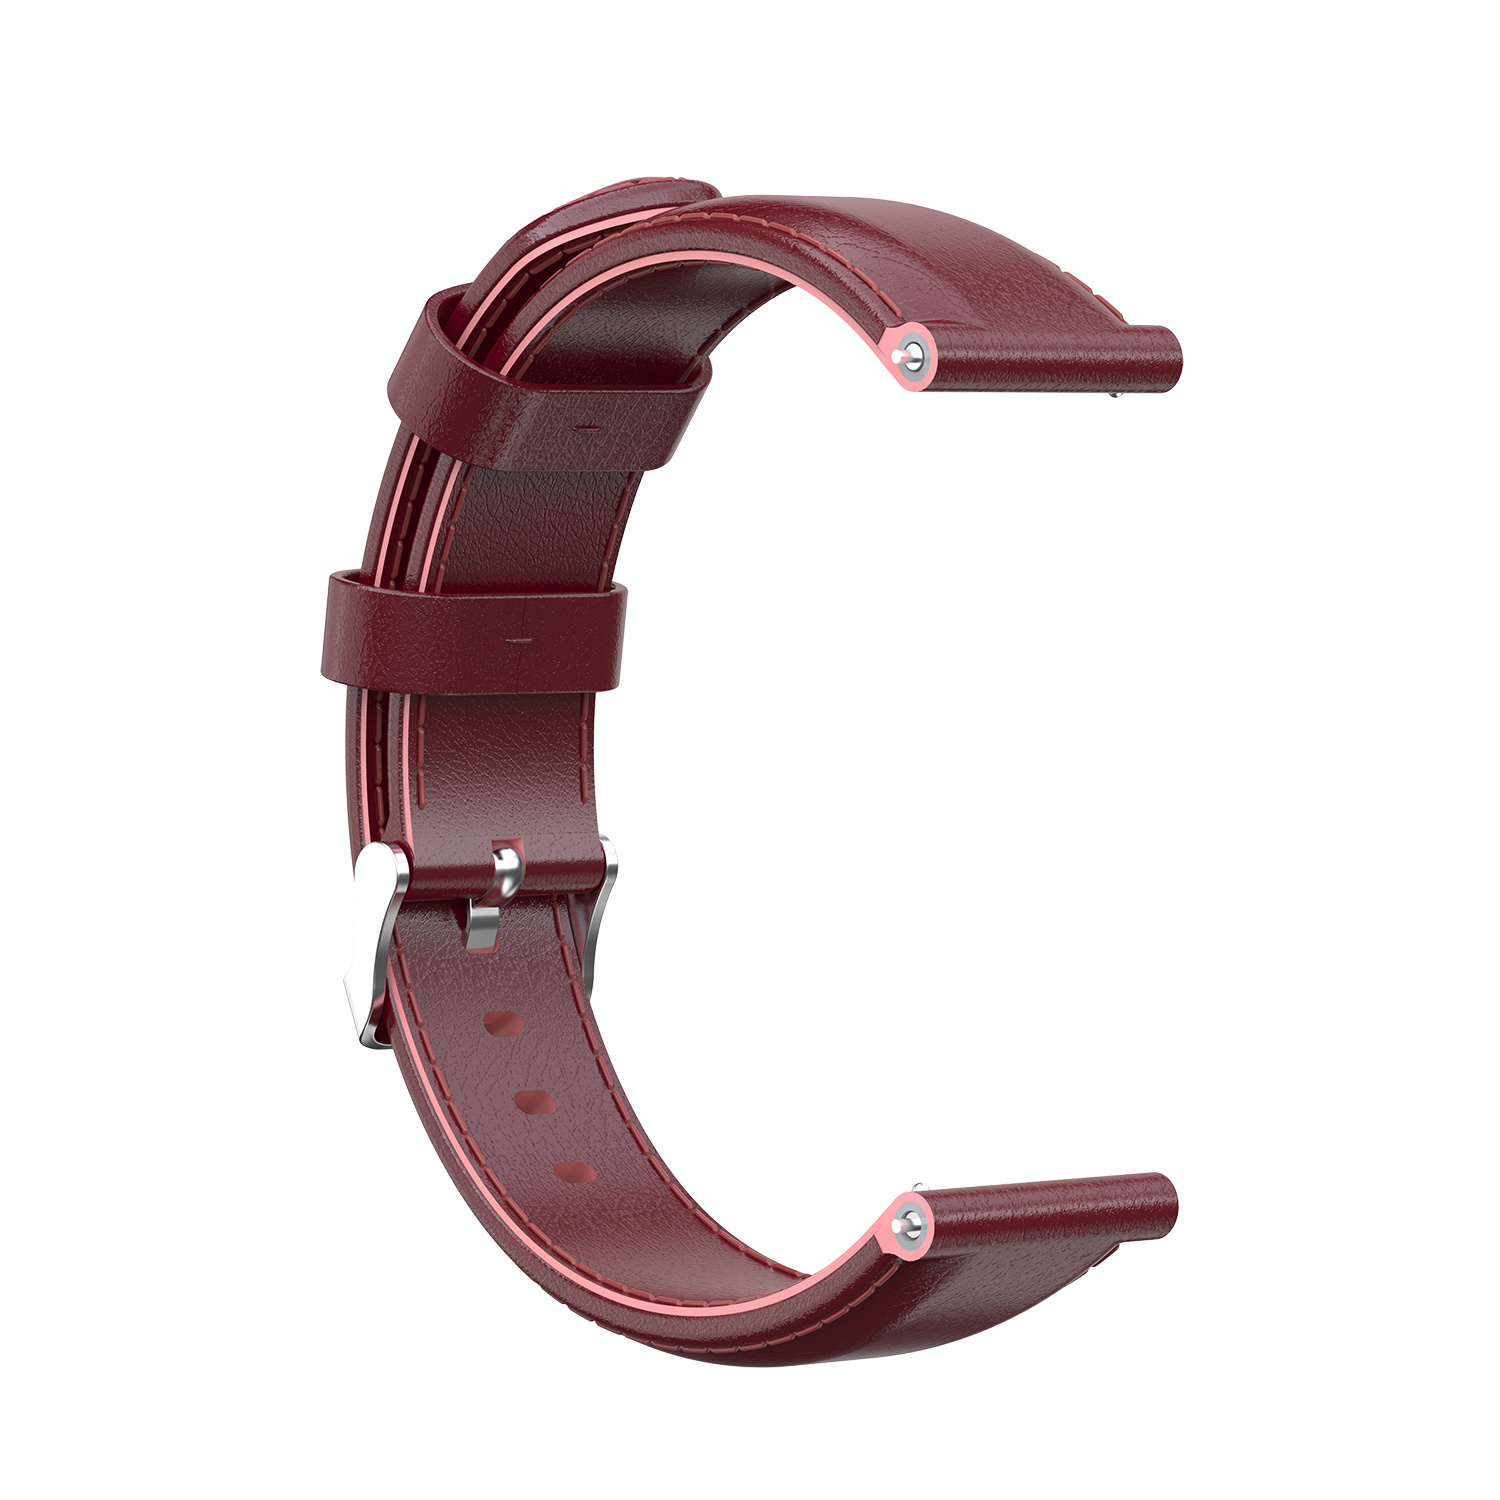 Huawei Watch Gt Leather Strap - Wine Red